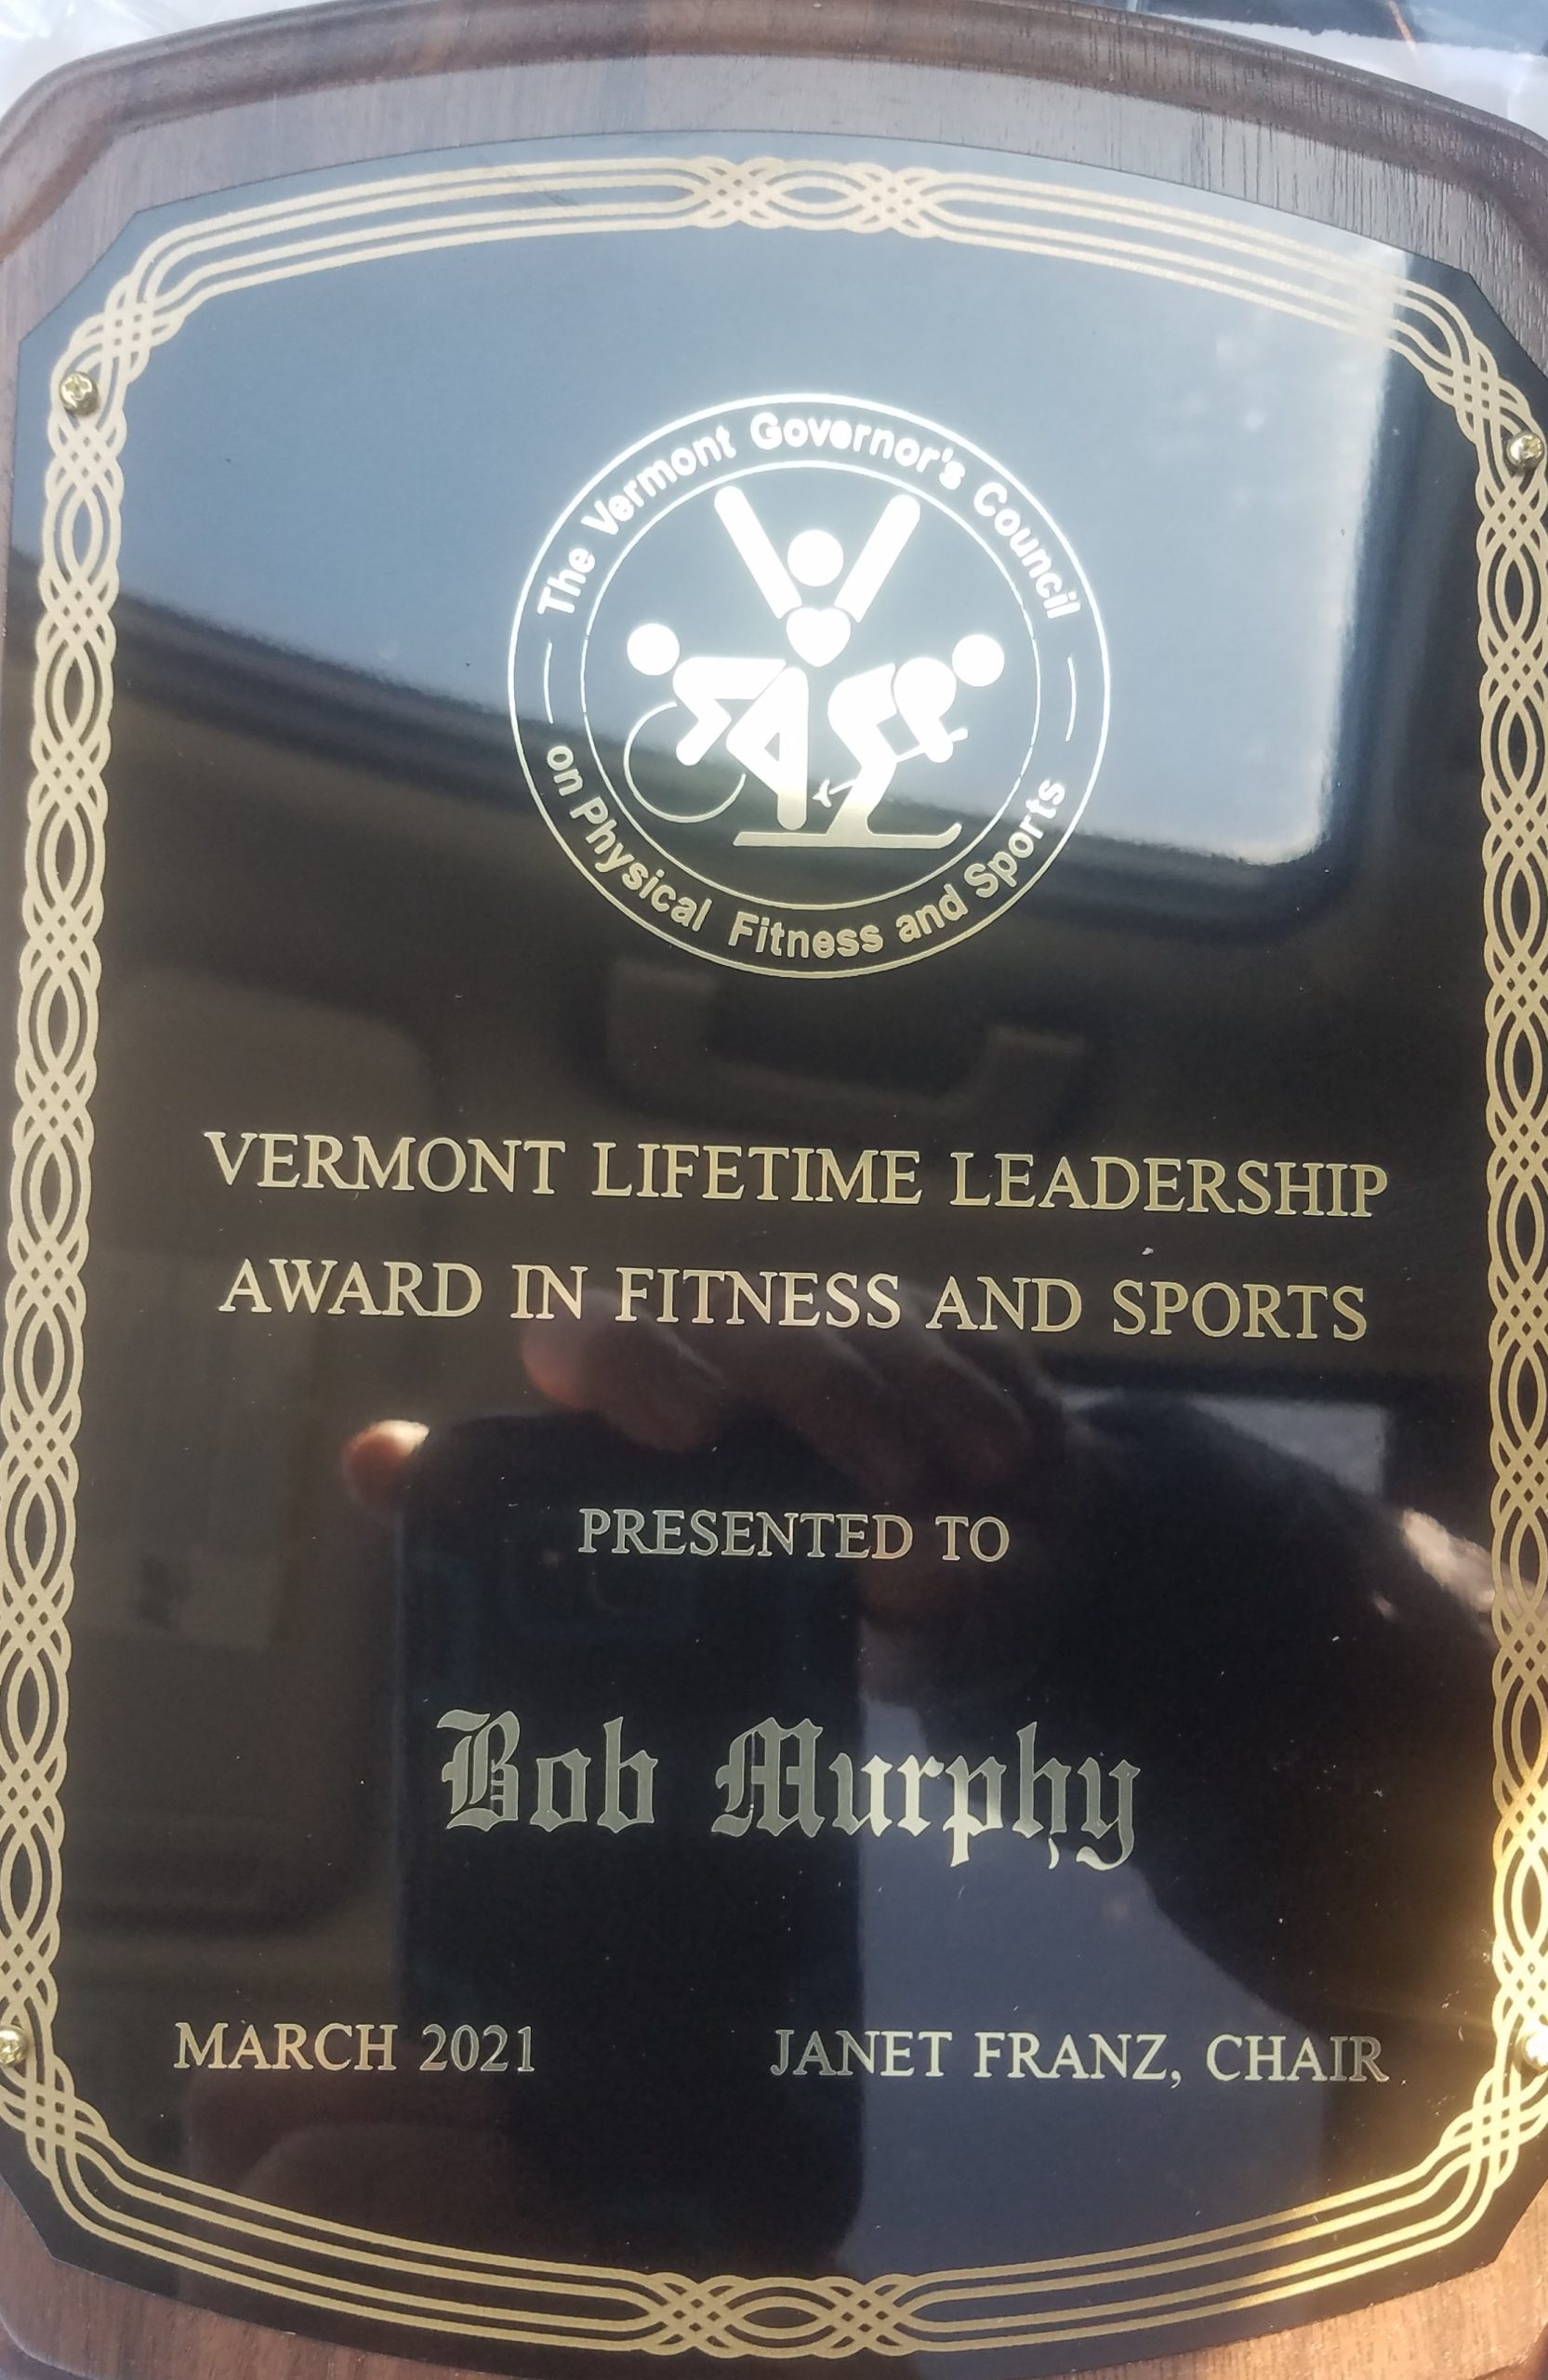 Vermont Lifetime Leadership Award in Fitness and Sports presented to Bob Murphy